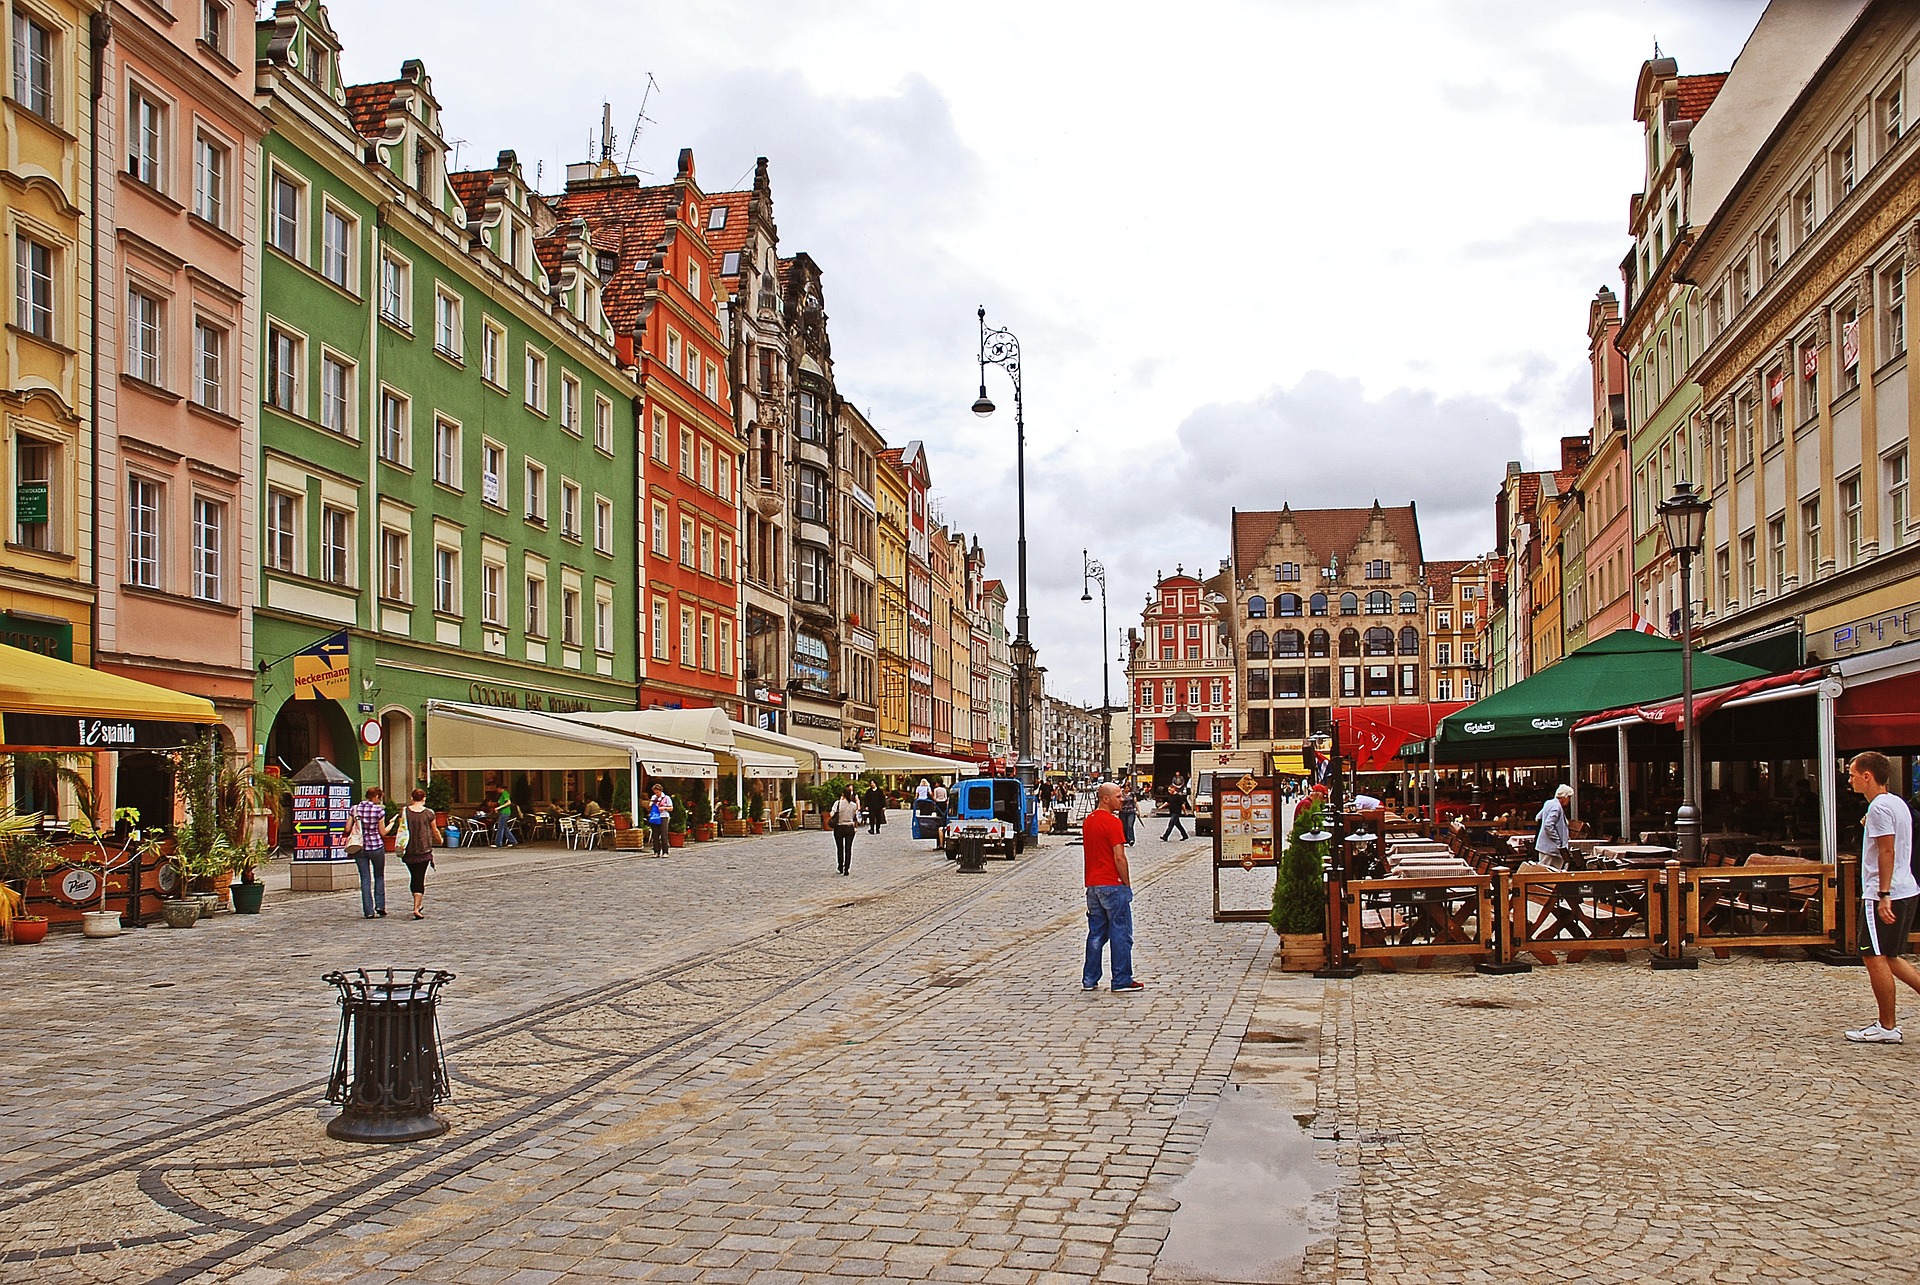 Explore the Heart of Wrocław